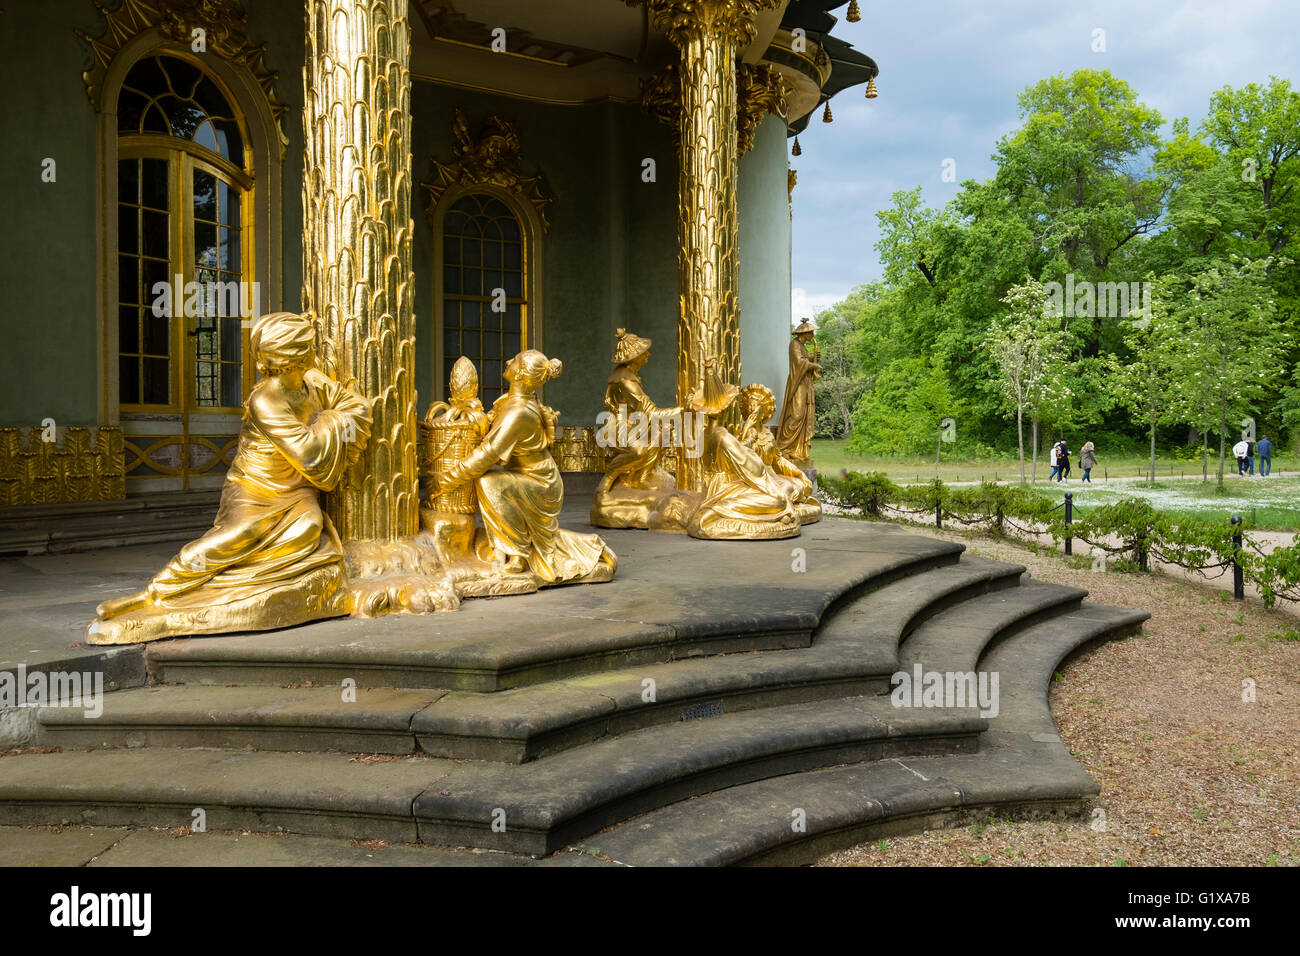 Golden statues decorate Chinese Teahouse in Sanssoucci park in Potsdam, Brandenburg, Germany Stock Photo